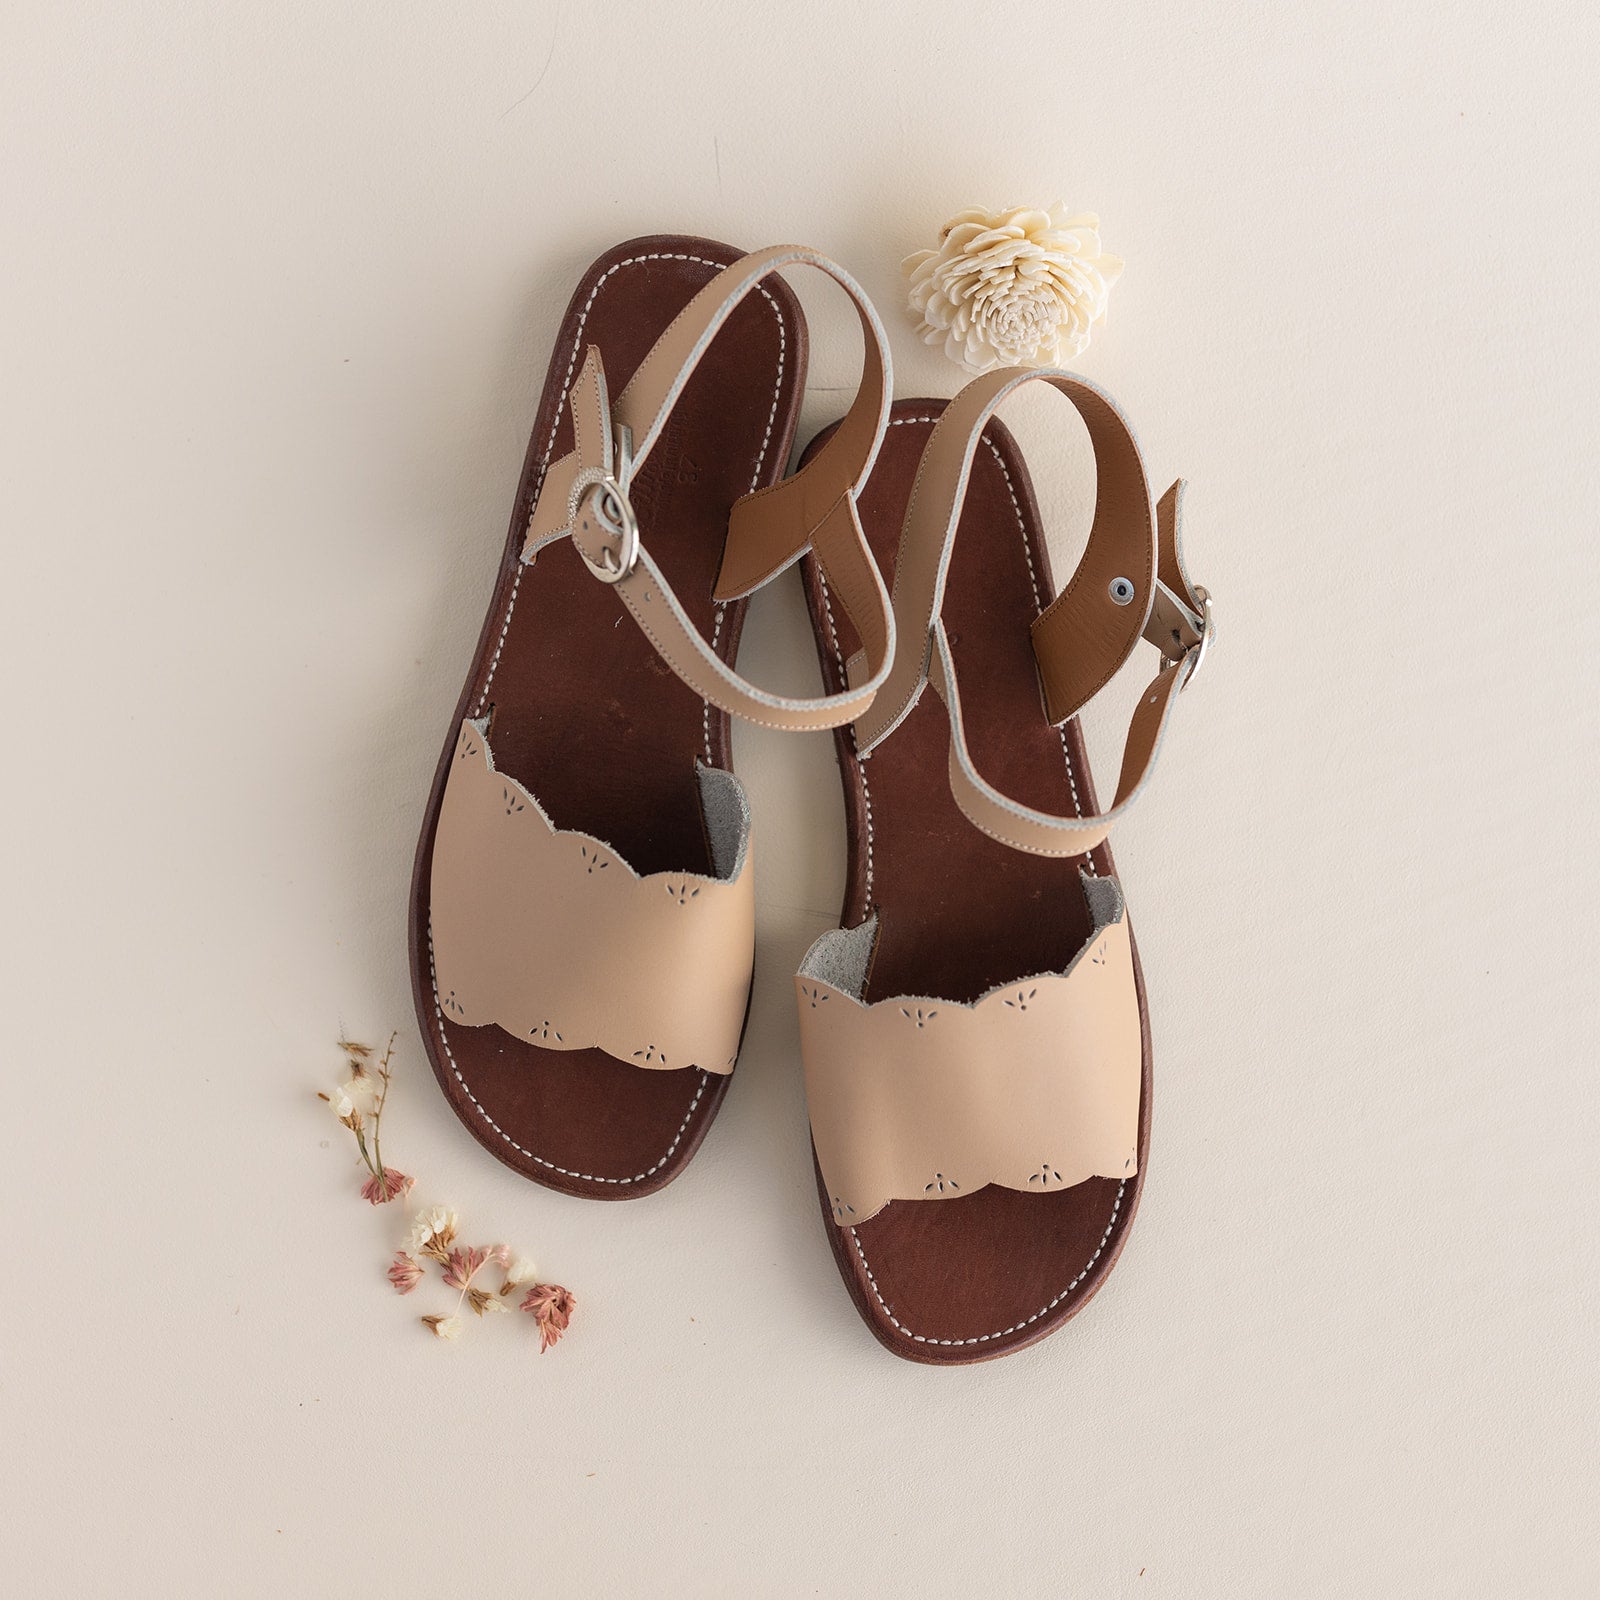 Adelisa & Co nude blush pink leather sandals for women with scallop and floral detailing.